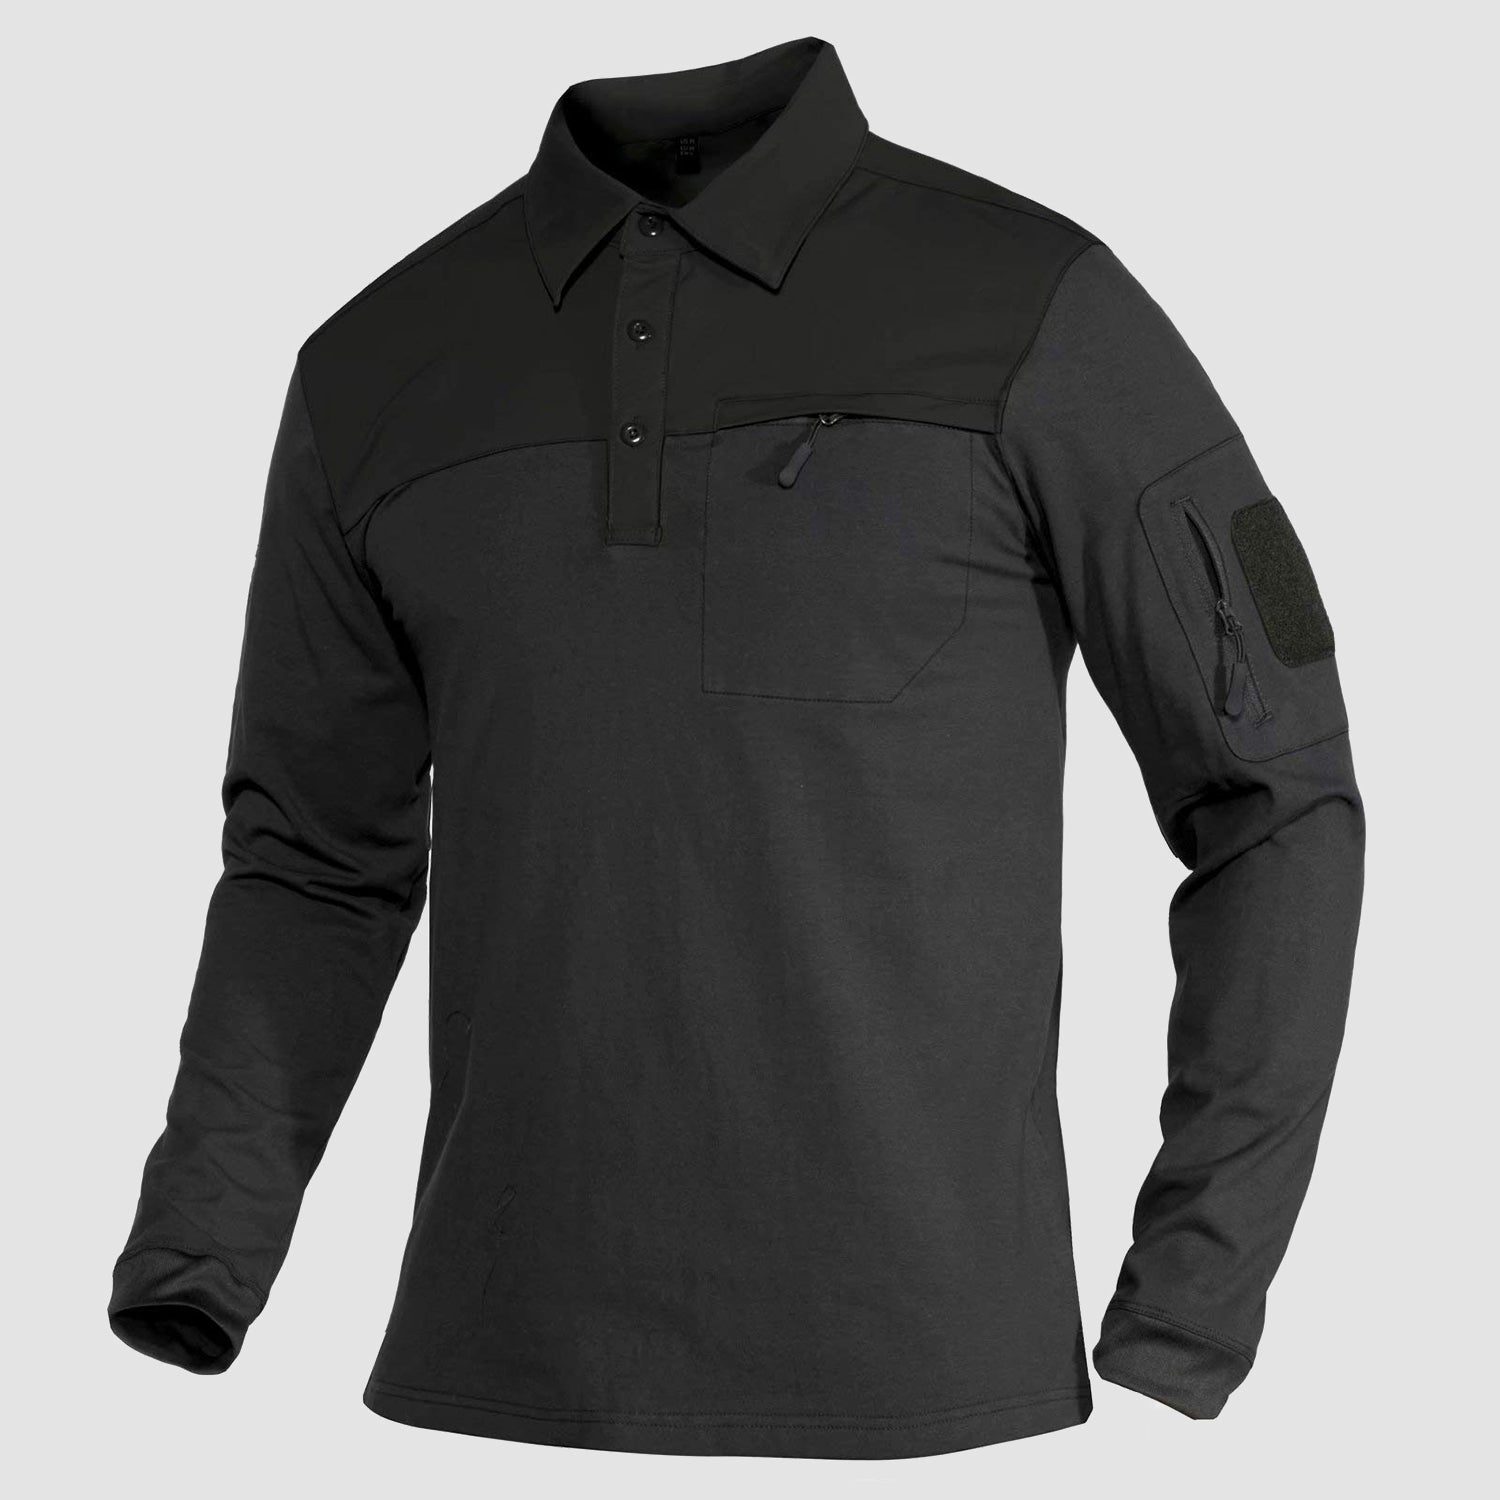 Men's Polo Shirts Long Sleeve with 2 Zipper Pockets Loop Patches Cotton Tactical Shirts